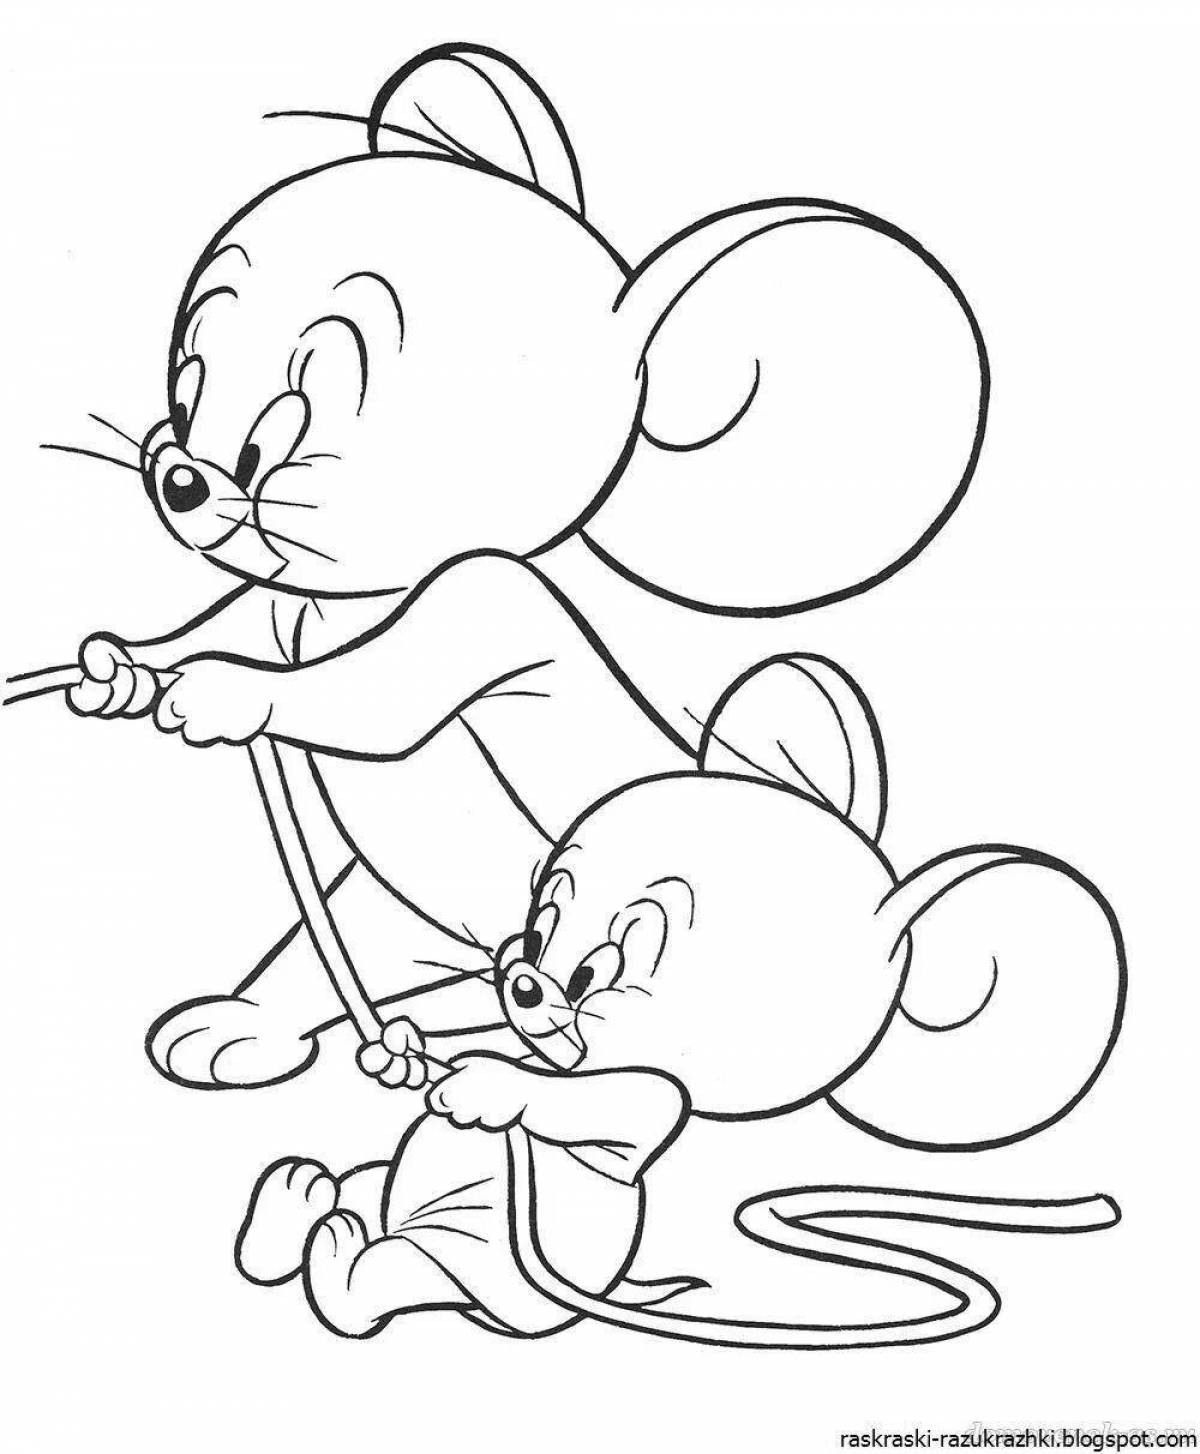 Archive of colored coloring pages for children